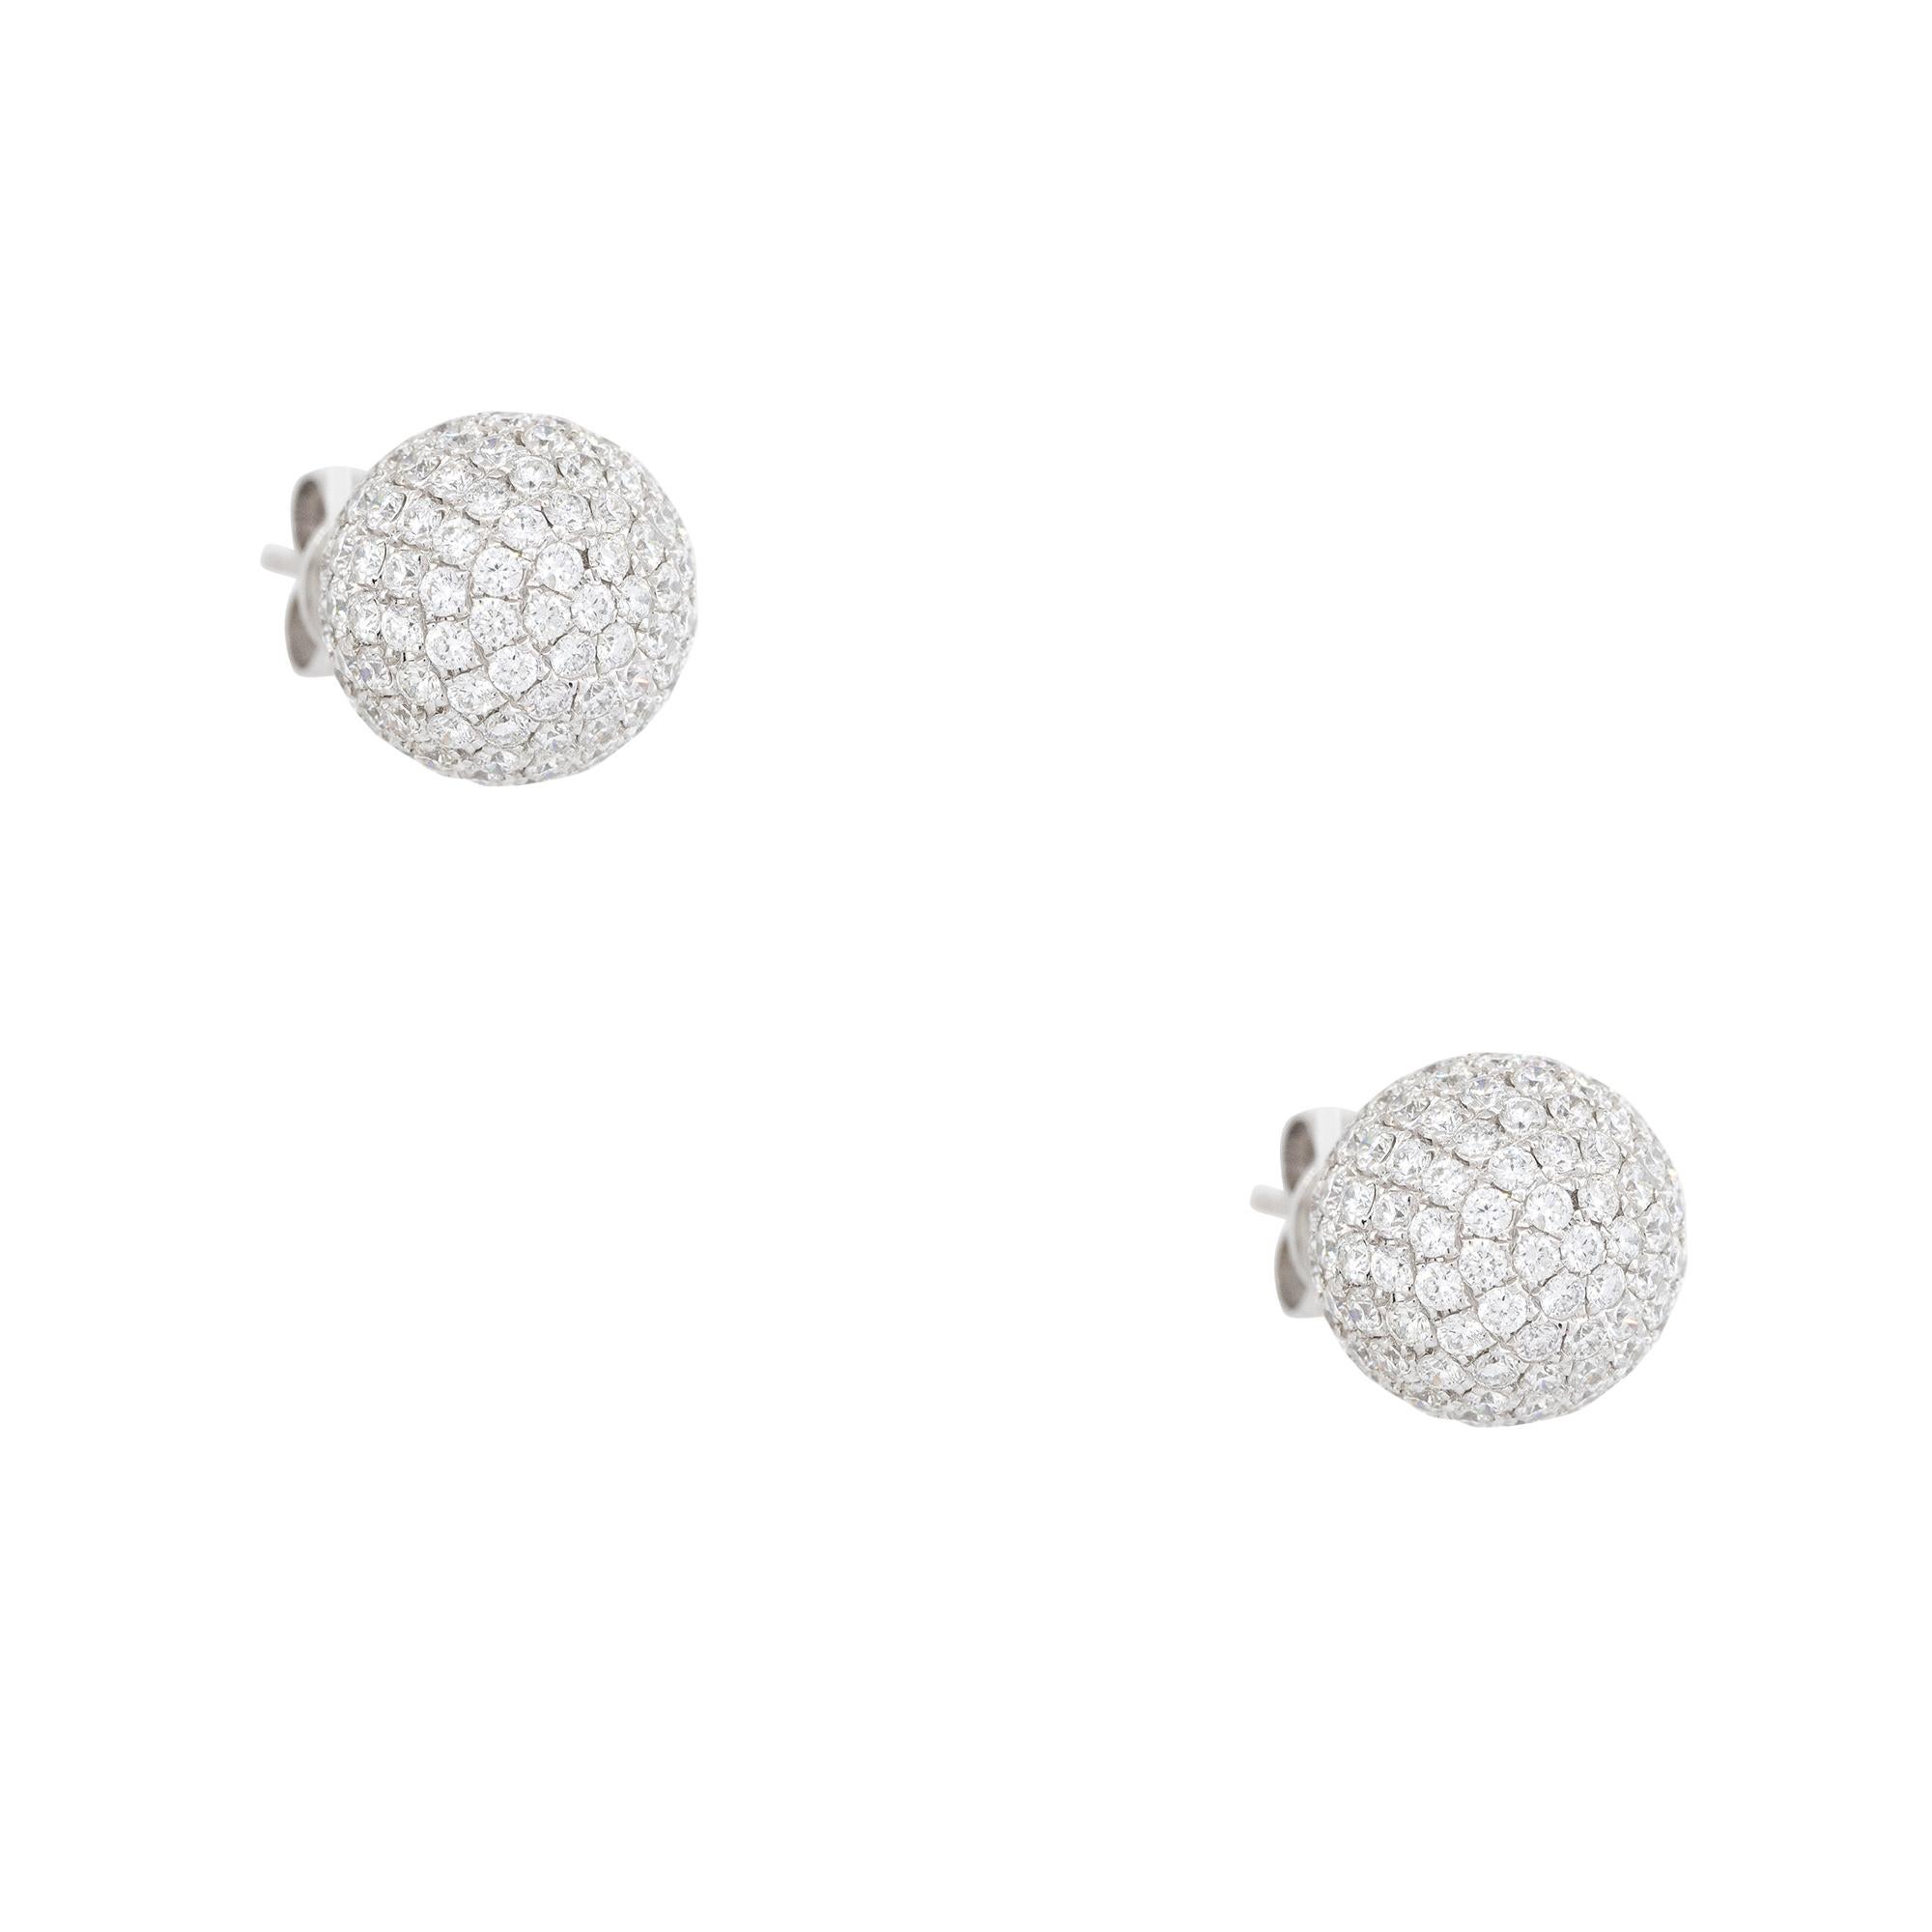 Round Cut 3.38 Carat Pave Diamond Ball Earrings 18 Karat In Stock For Sale